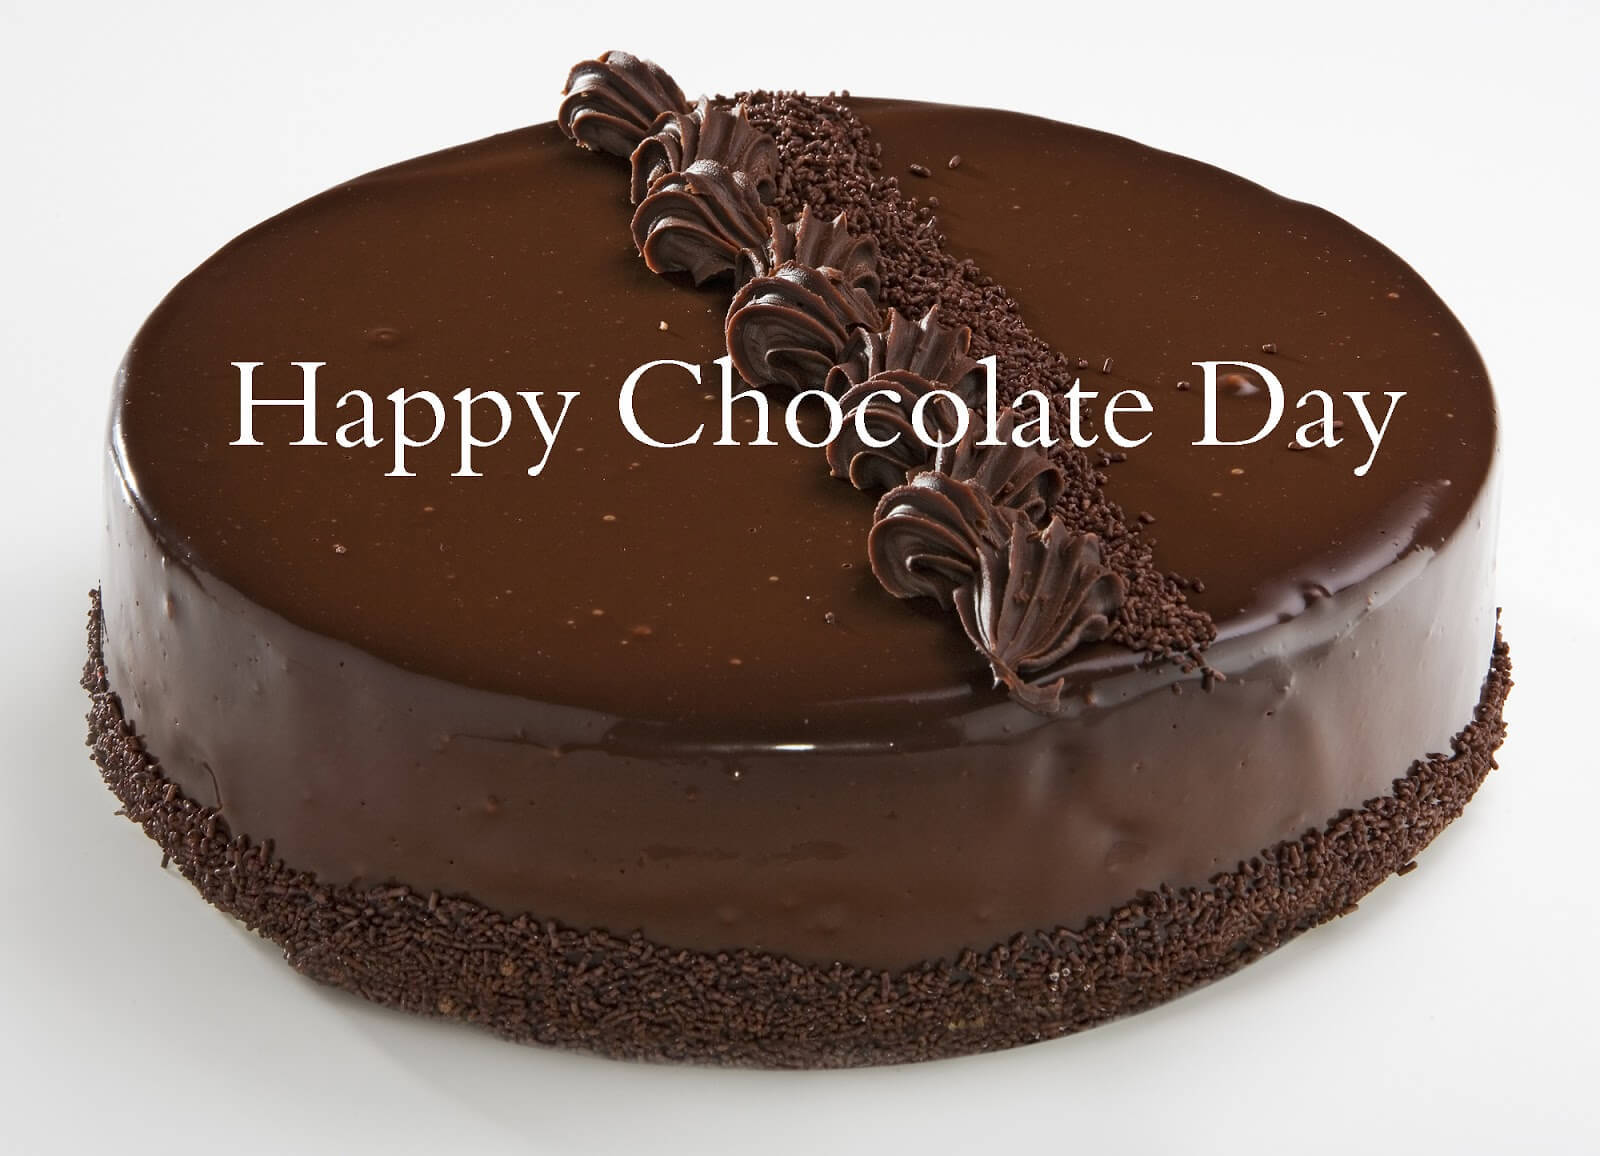 Download Chocolate Day Cake Wallpaper | Wallpapers.com